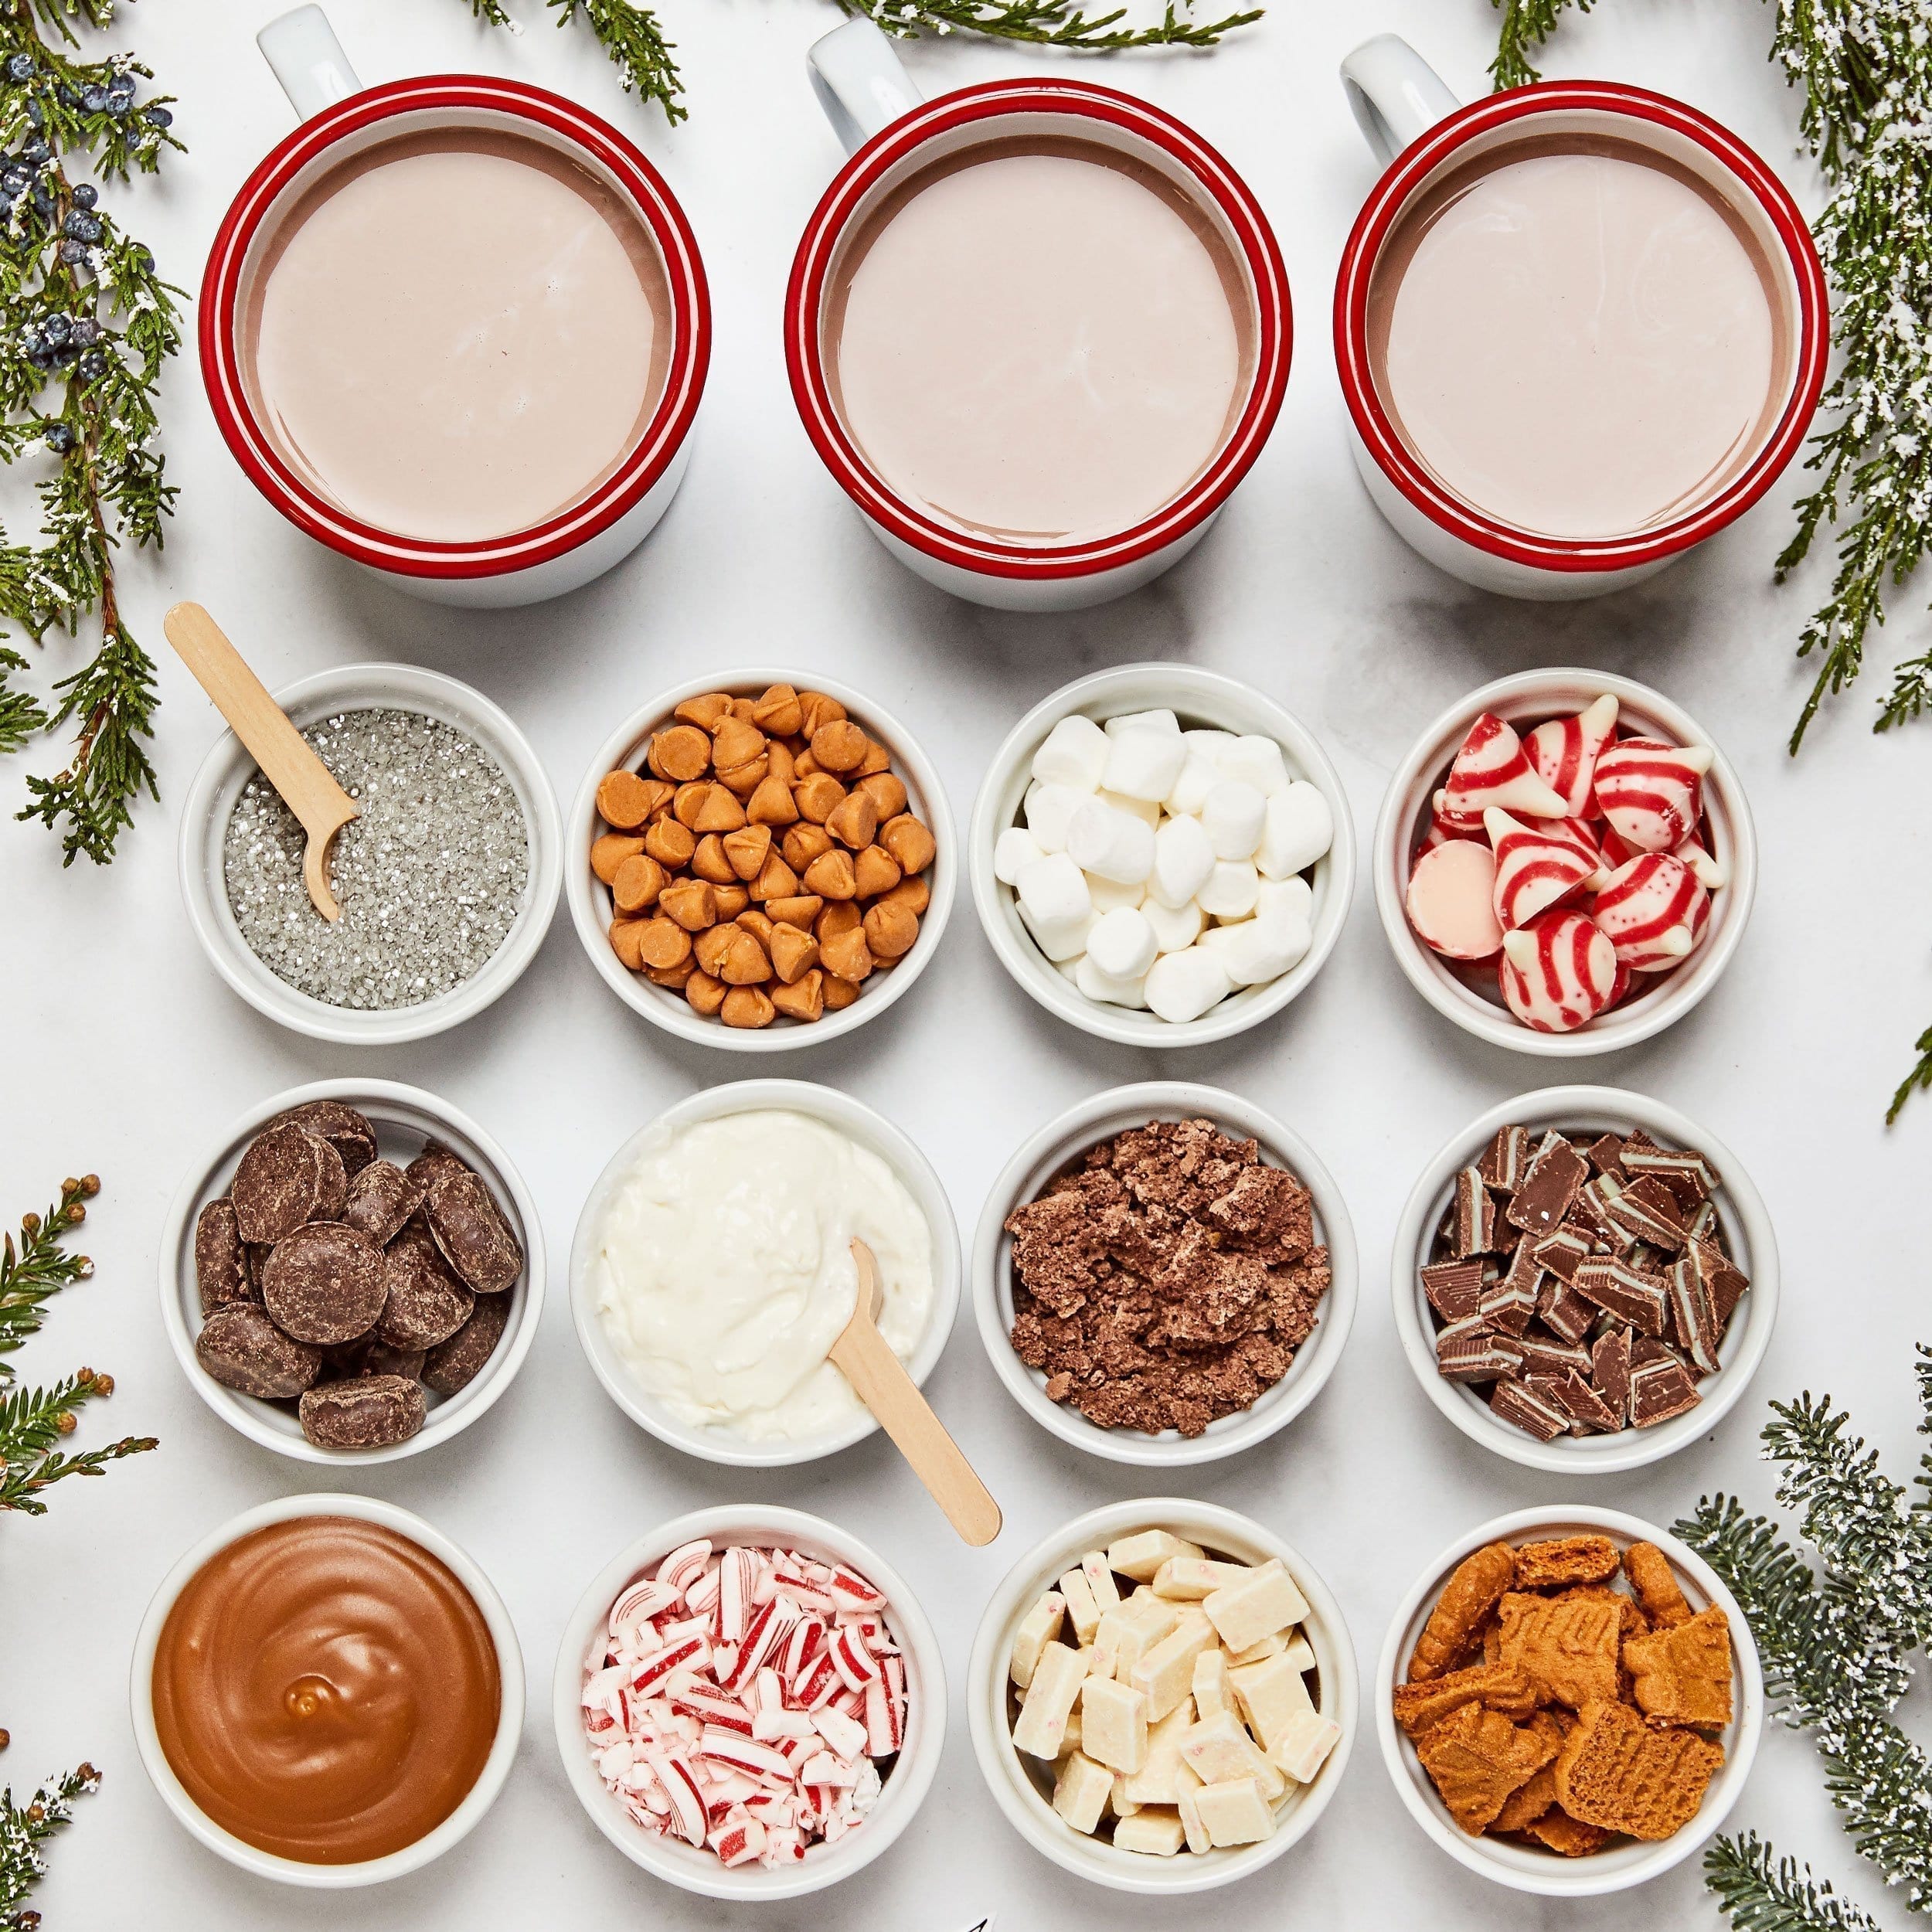 Mix-Your-Own Hot Chocolate Bar